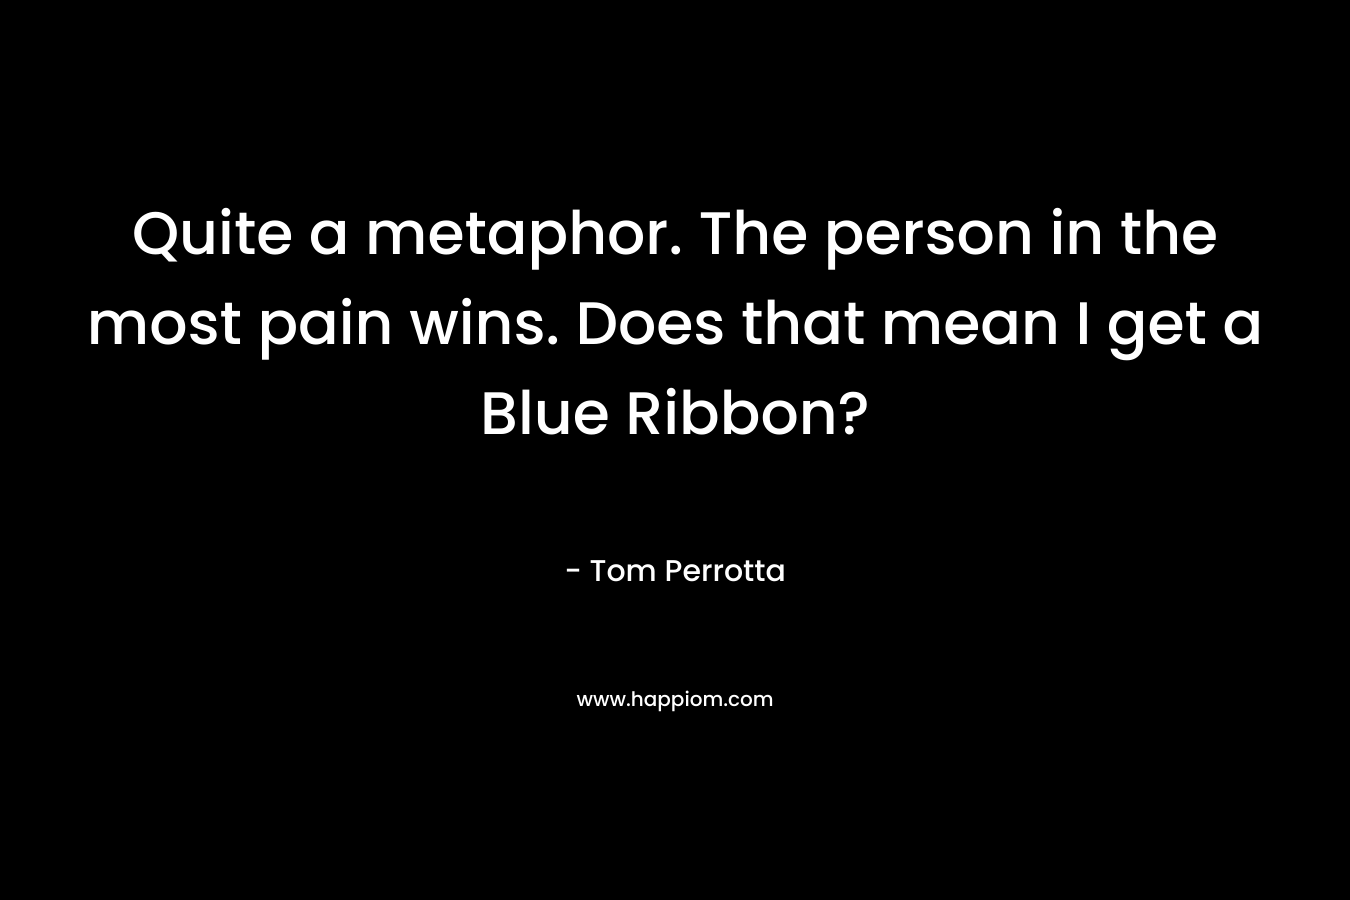 Quite a metaphor. The person in the most pain wins. Does that mean I get a Blue Ribbon?